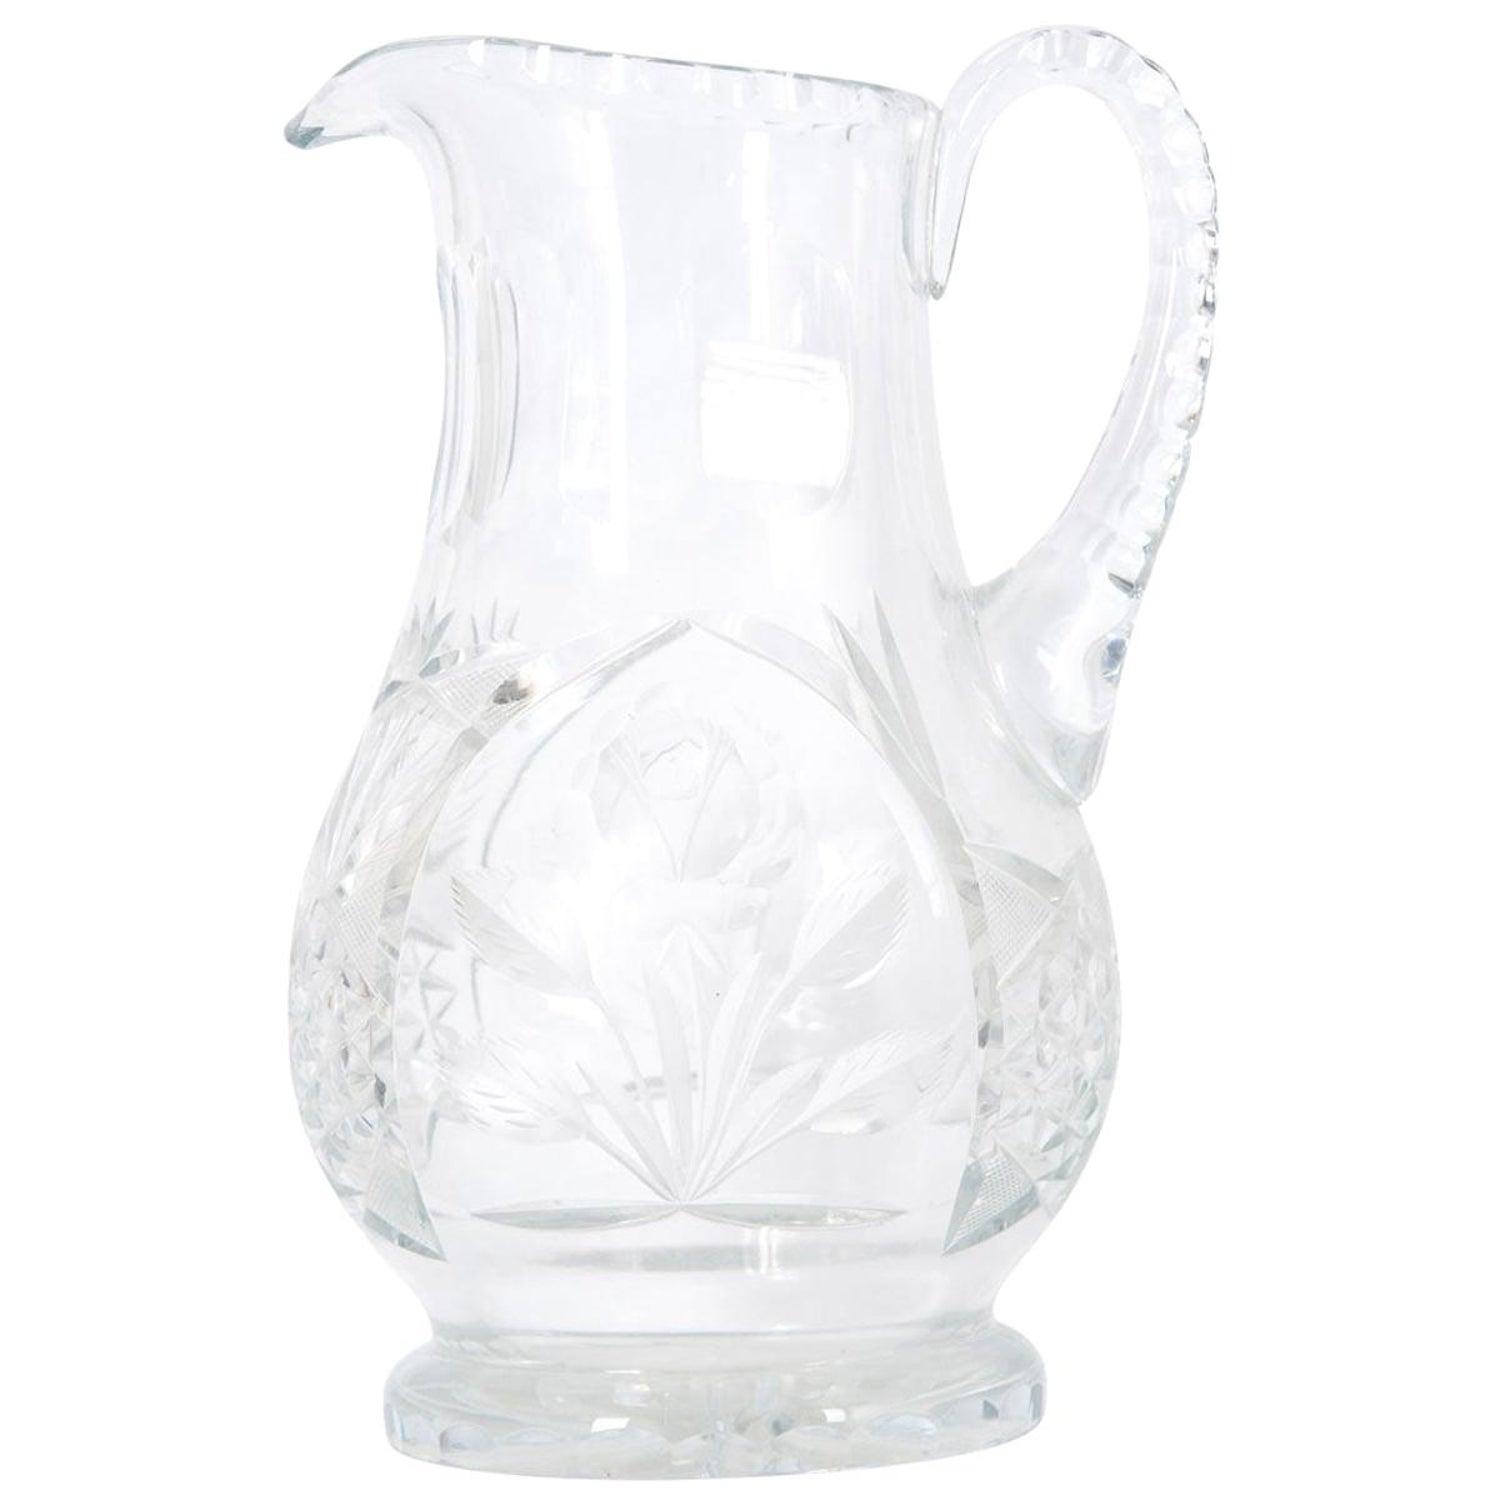 https://a.1stdibscdn.com/french-19th-century-cut-crystal-pitcher-for-sale/1121189/f_219656521609488781521/21965652_master.jpg?width=1500